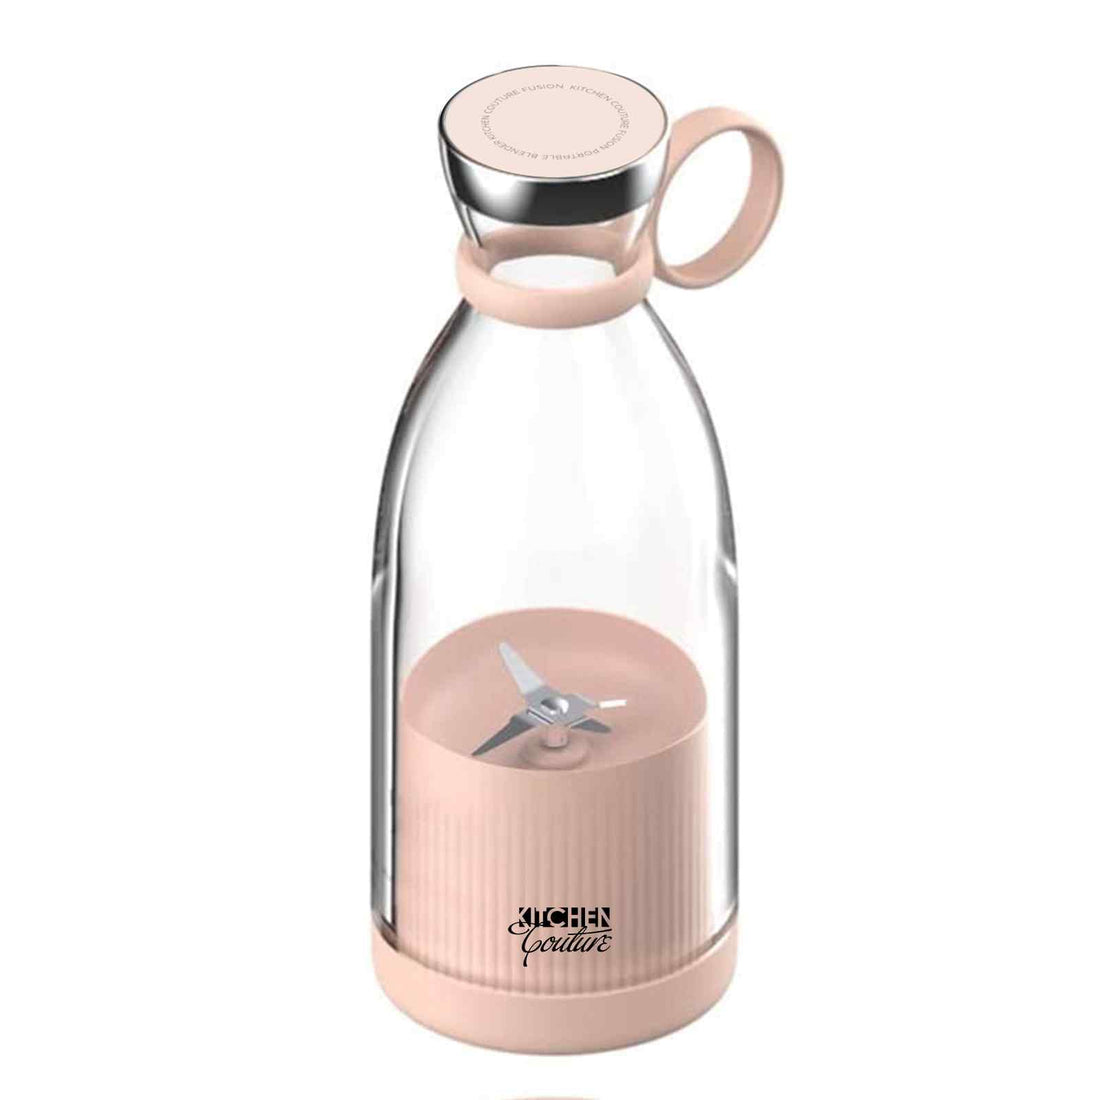 Kitchen Couture Fusion Portable Blender Electric Hand Held Mixer Shaker Maker-Small Kitchen Appliances-PEROZ Accessories